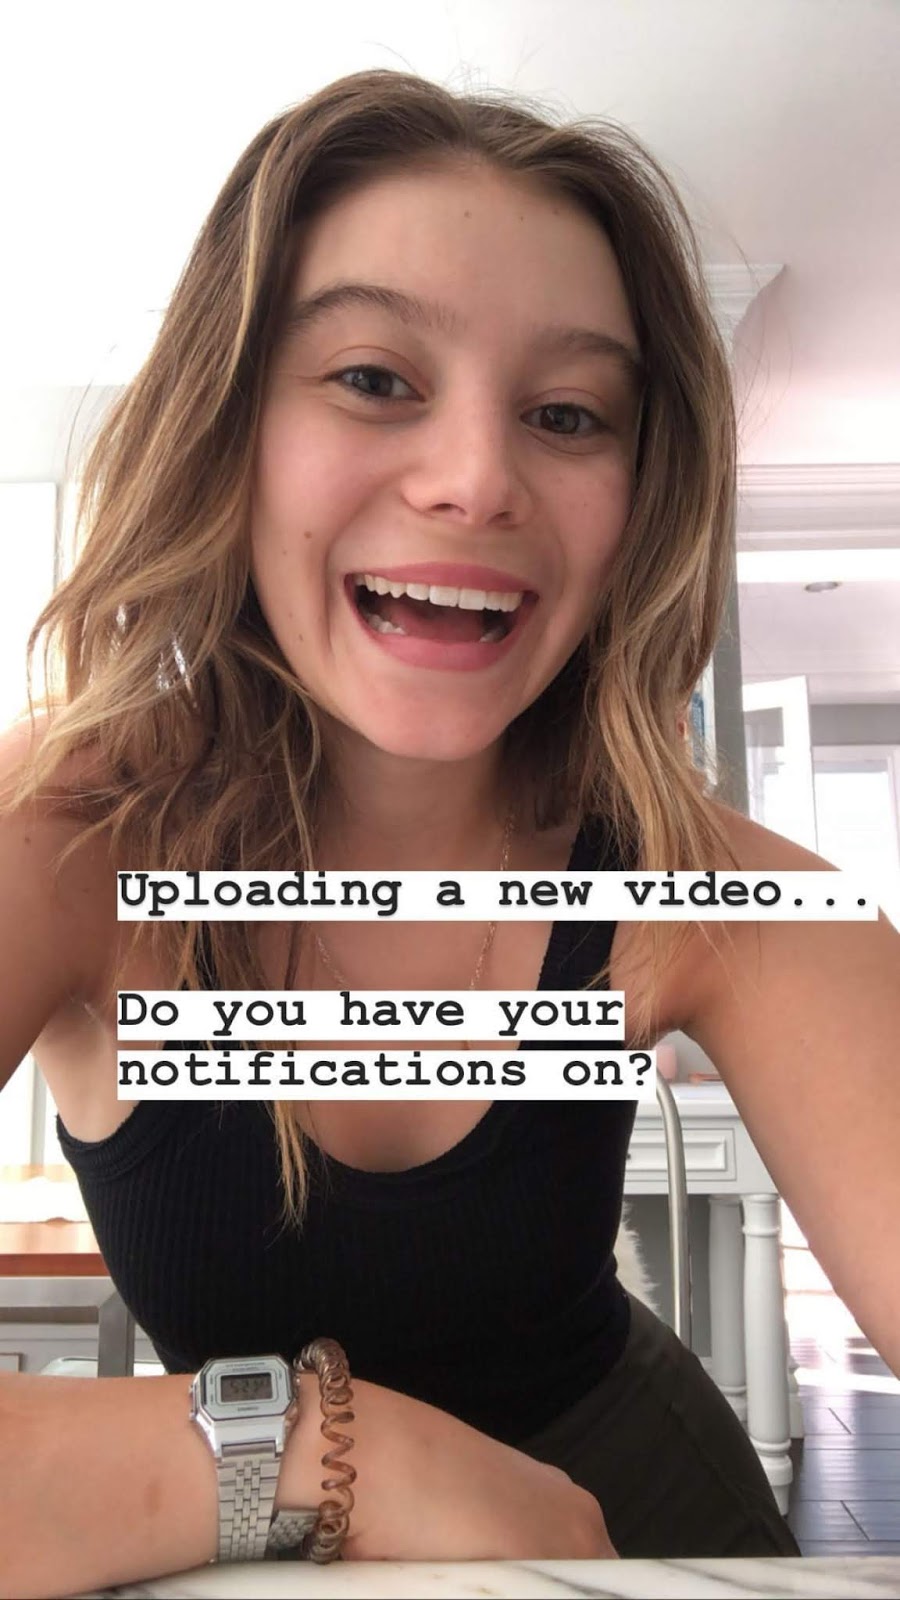 genevieve hannelius social media 05 11 2020 0 0 tuesday may 12 2020 ...